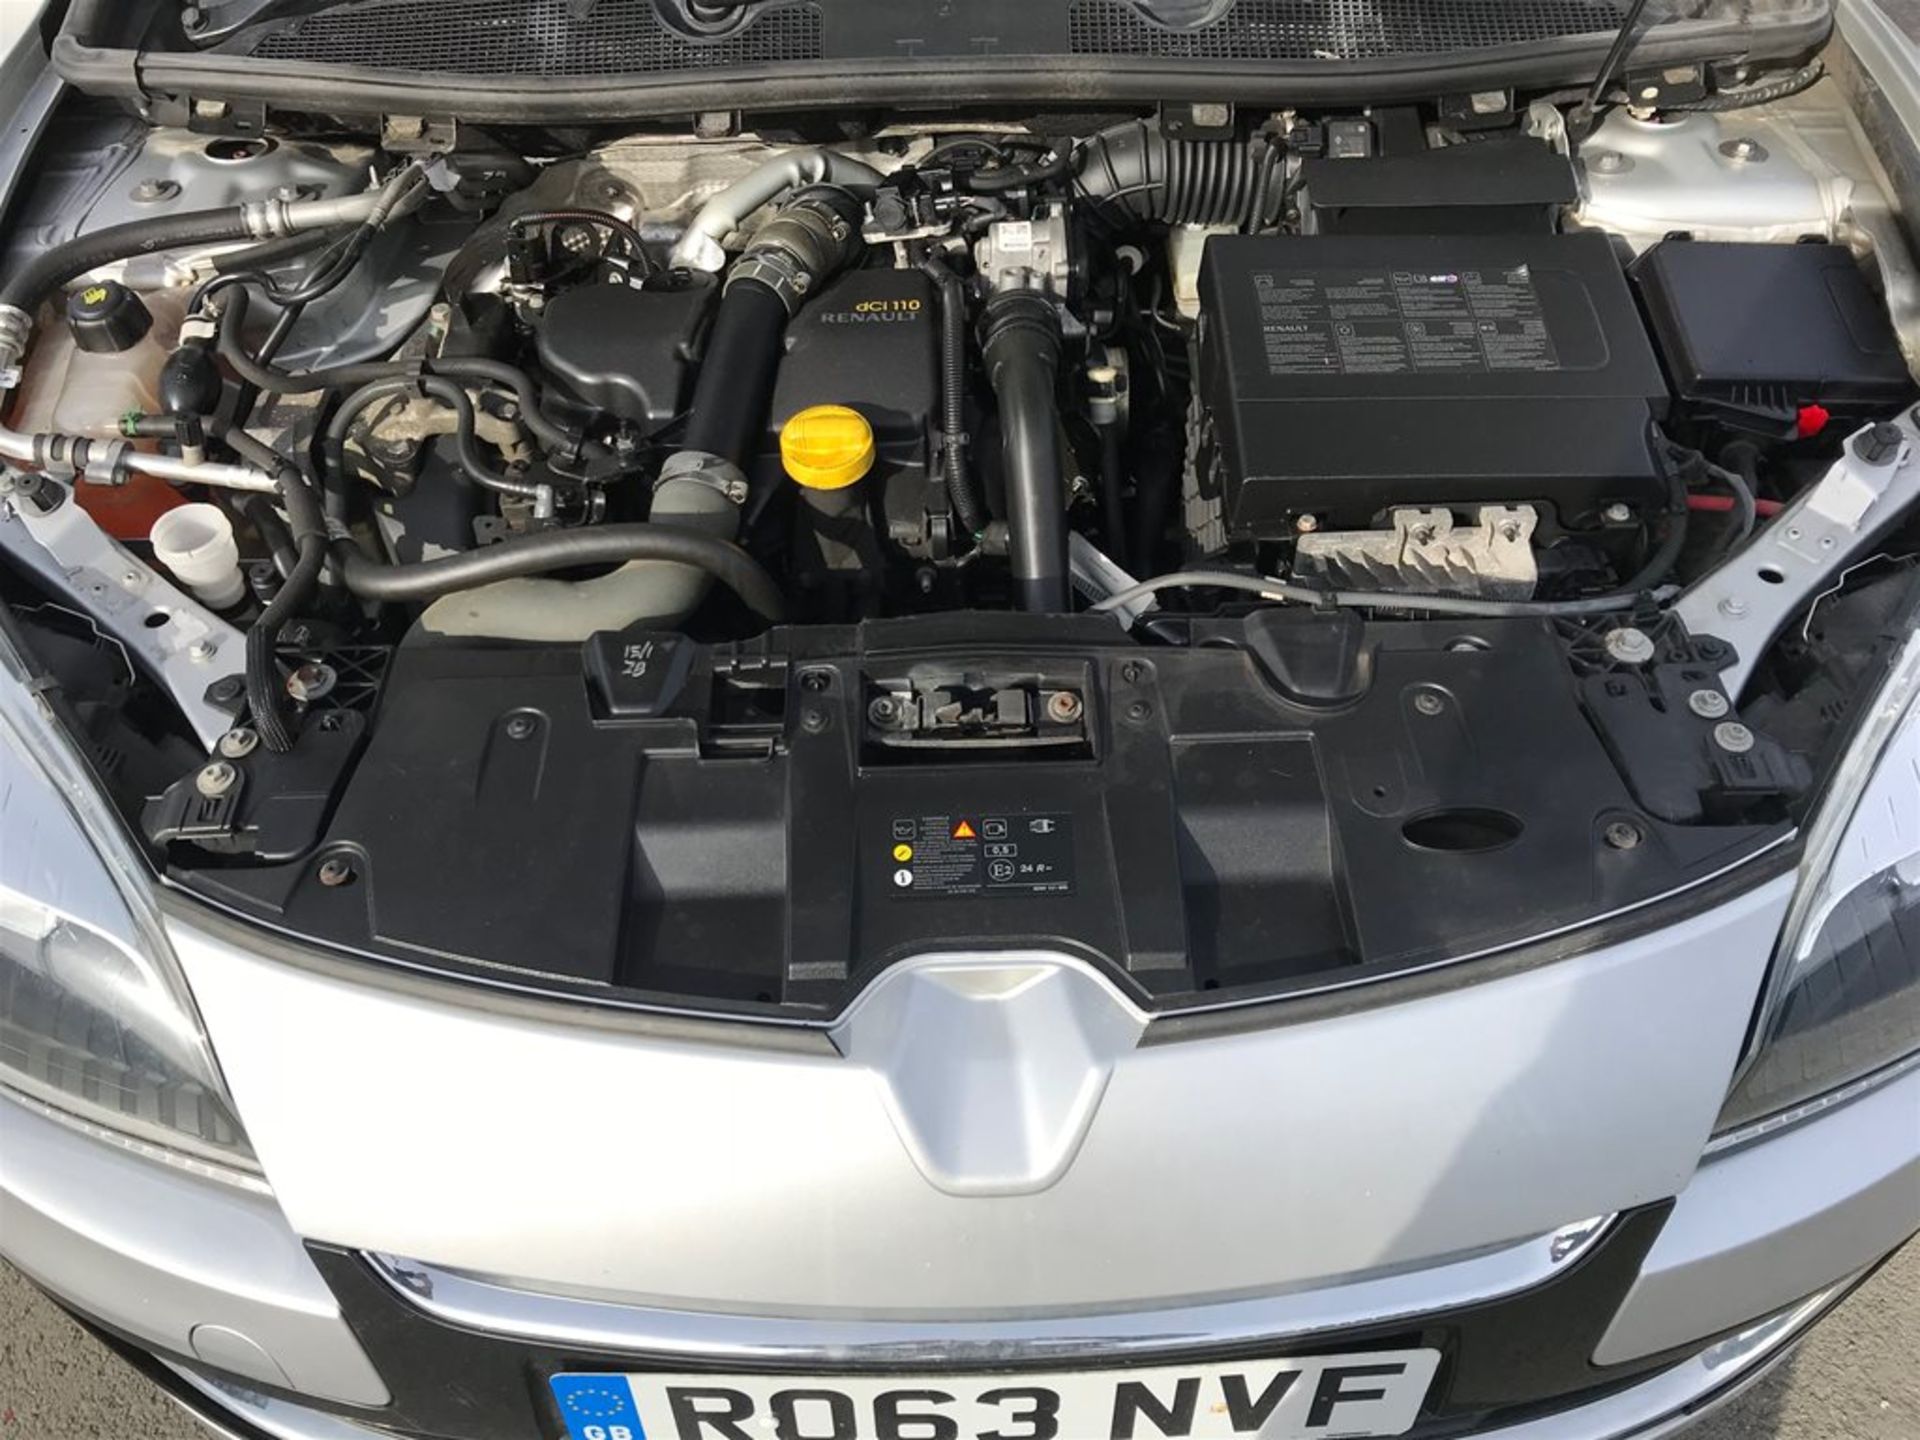 Renault Megane 1.5 dCi Limited Energy 110ps 5dr - Image 7 of 8